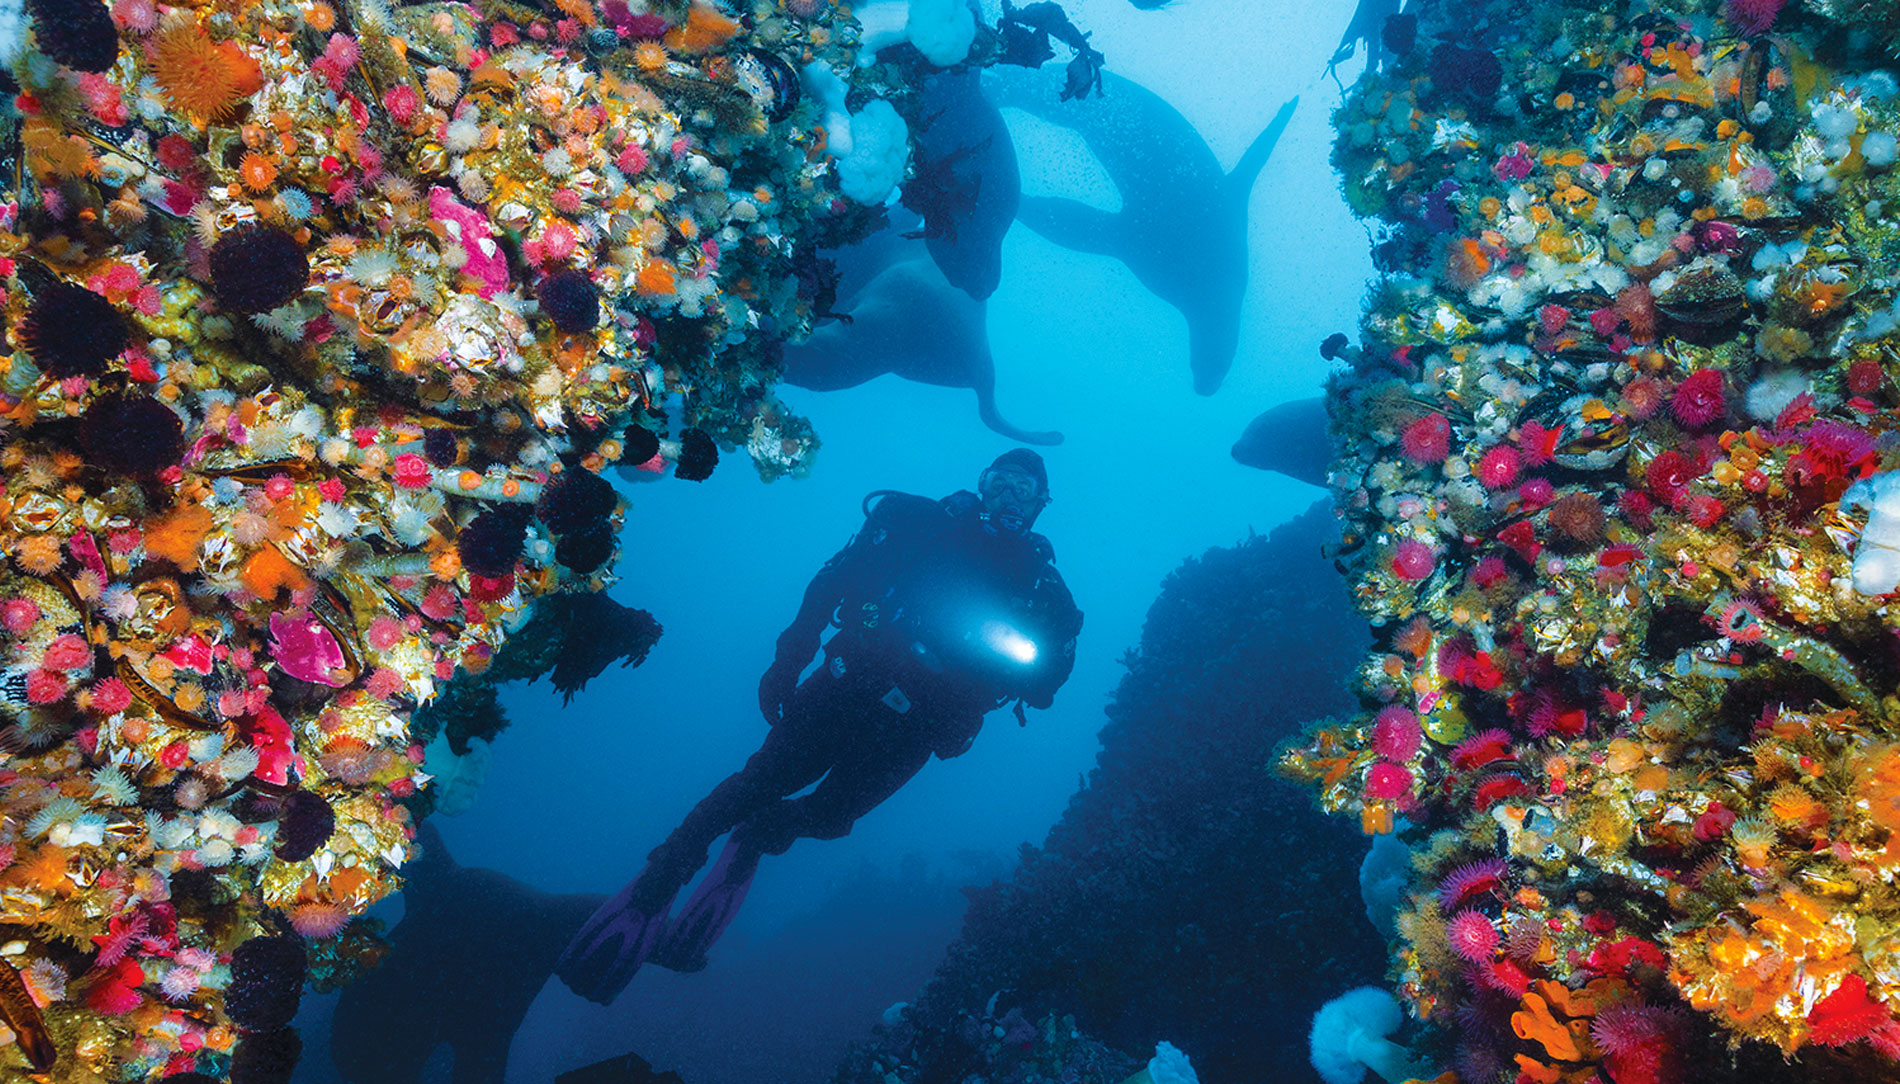 Duncan Rock divers marvel at walls carpeted by brightly colored sealife